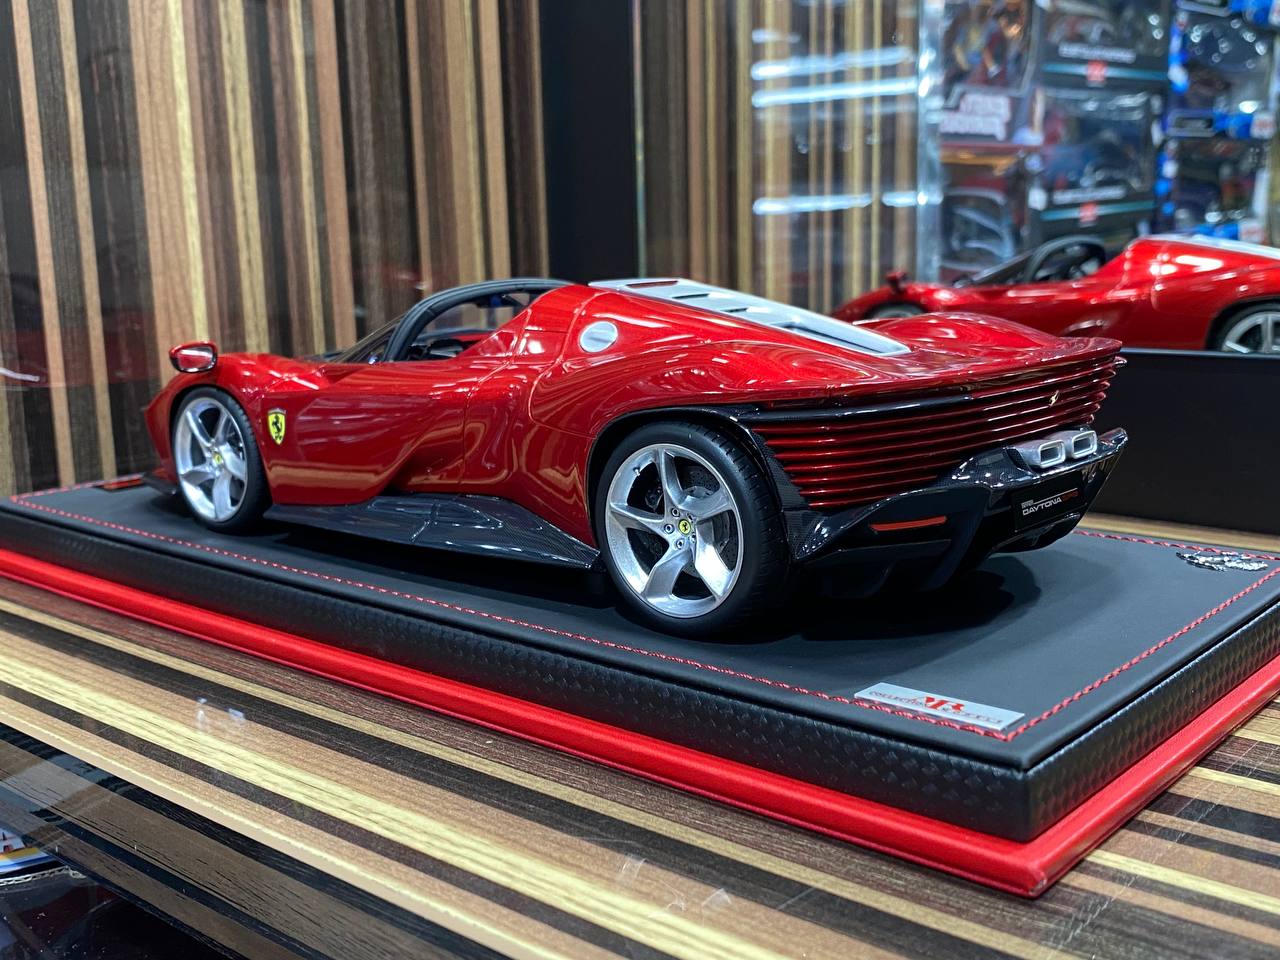 1/18 Resin Ferrari Daytona SP3 Rosso Magma Red Miniature Car by MR Collection